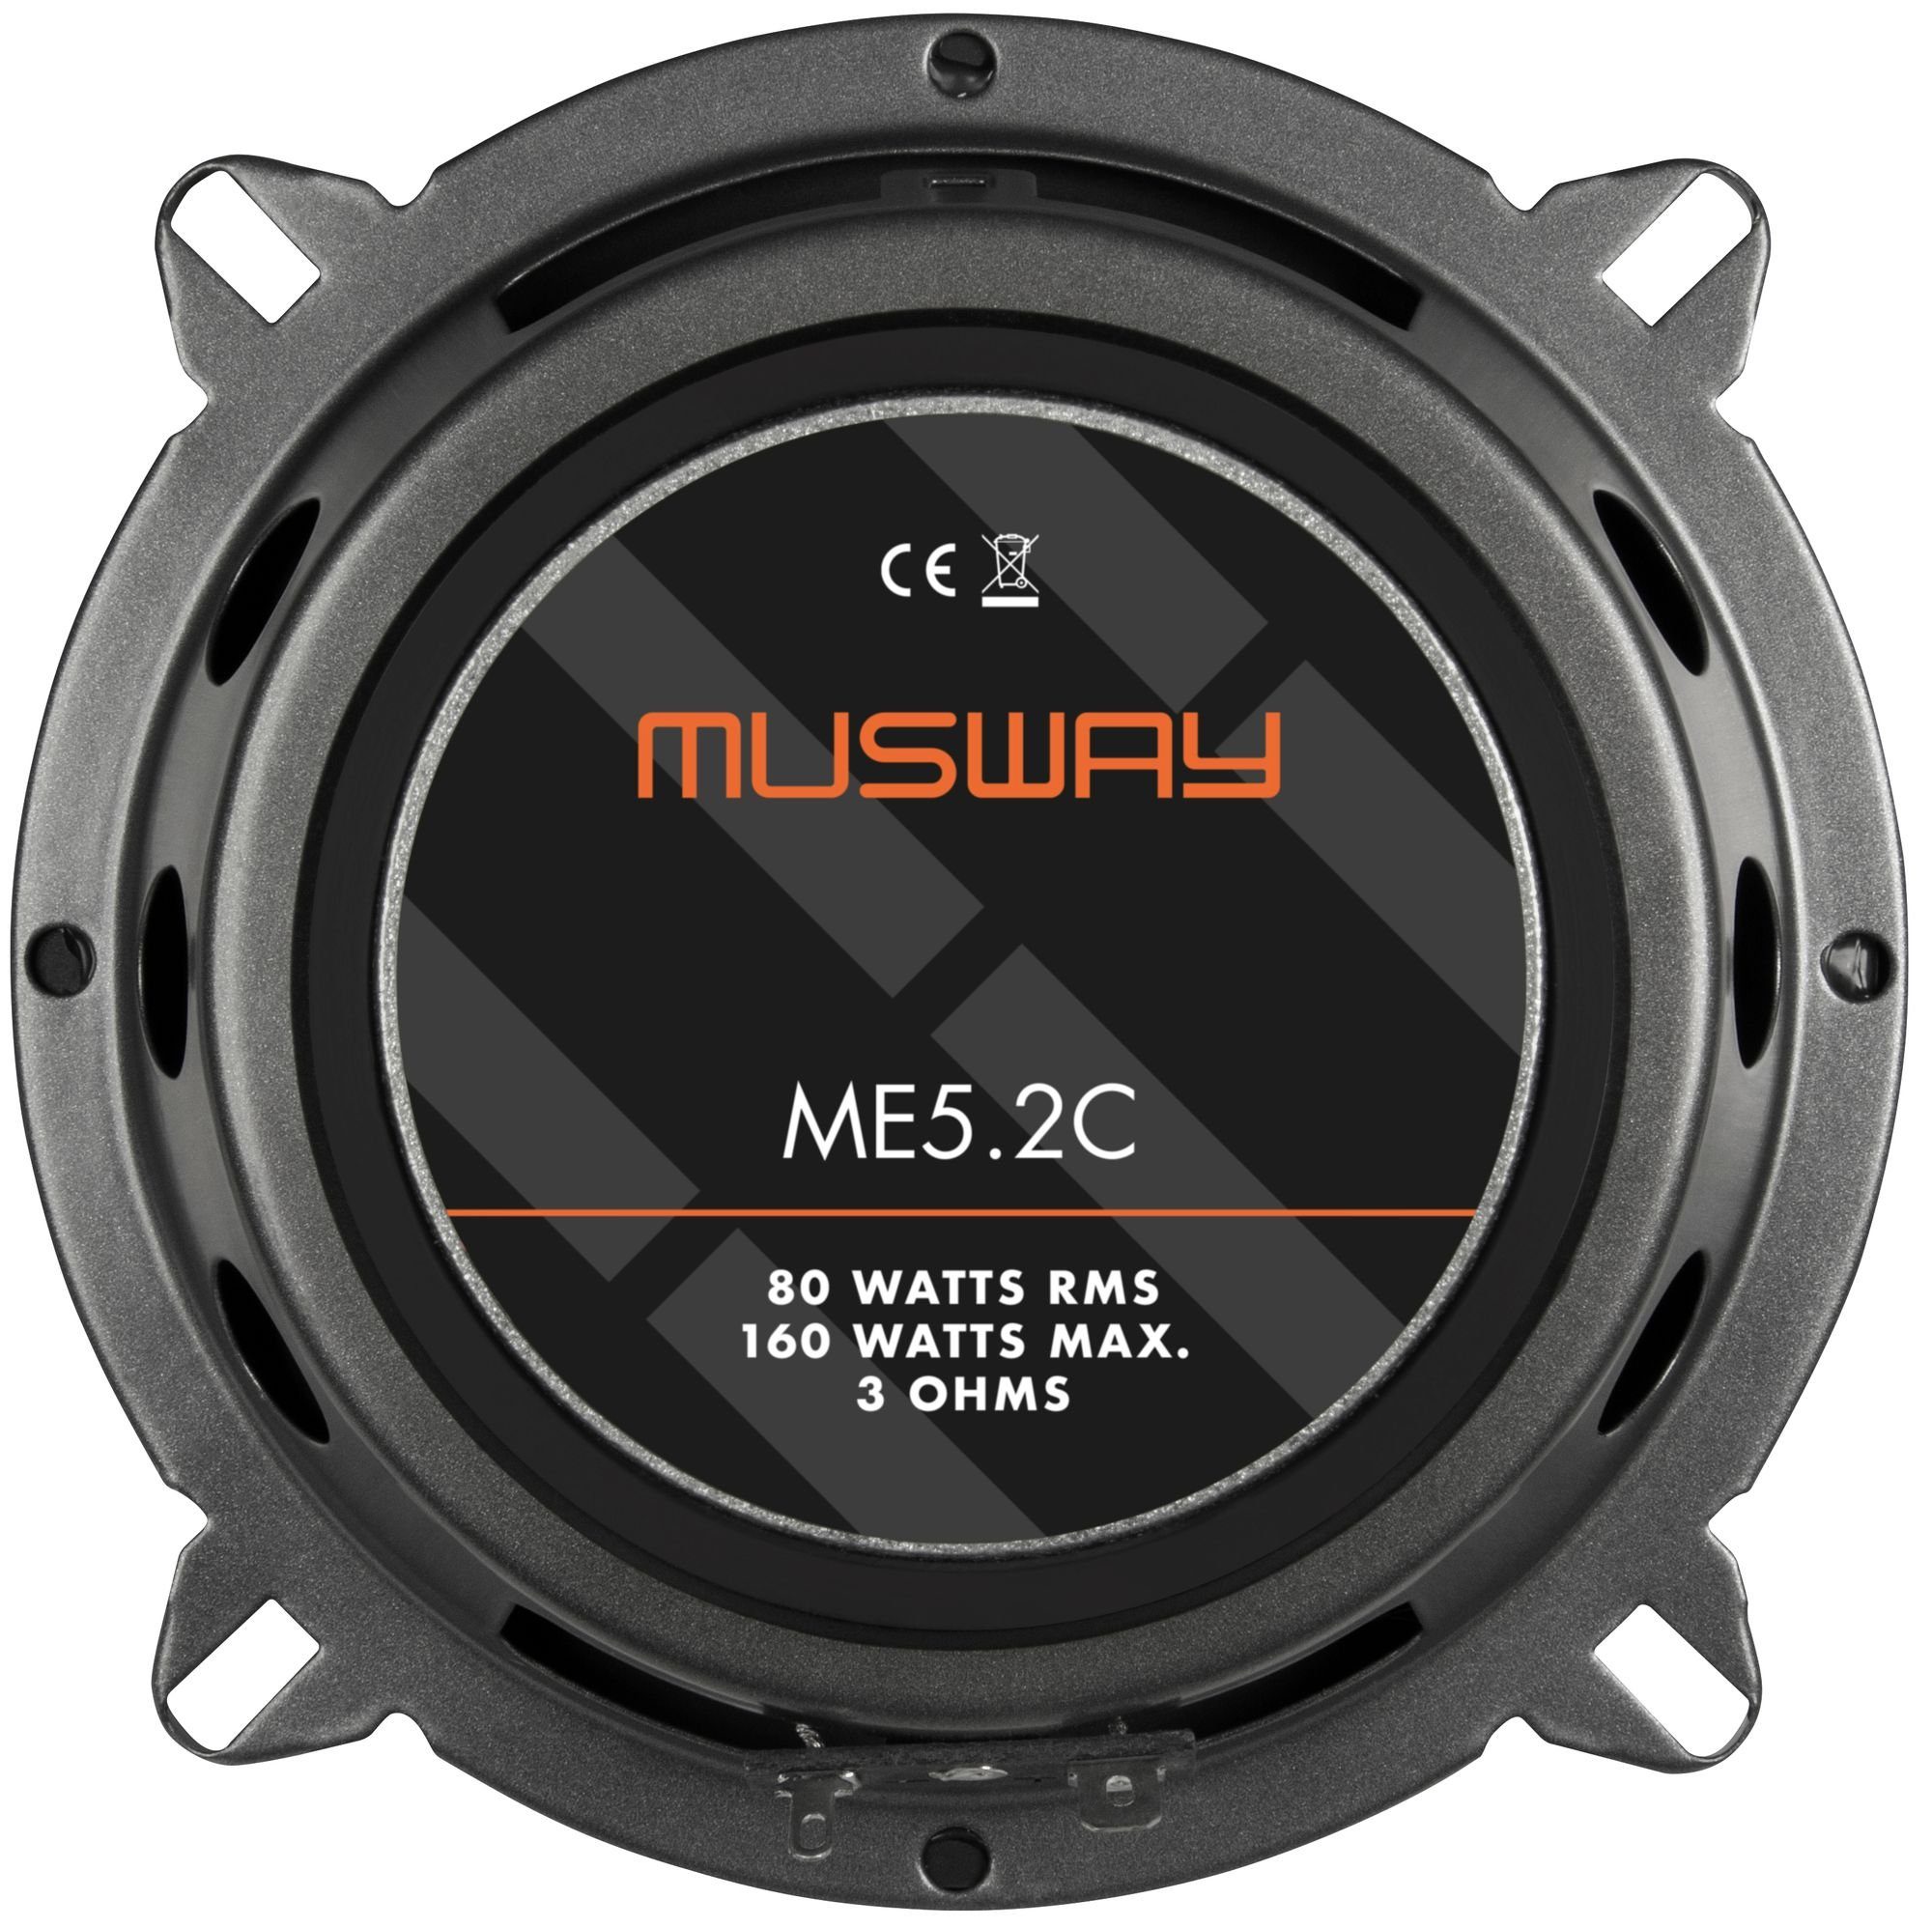 Musway Musway ME5.2C - 13cm System (Musway Auto-Lautsprecher 13cm System) Lautsprecher ME5.2C - Lautsprecher